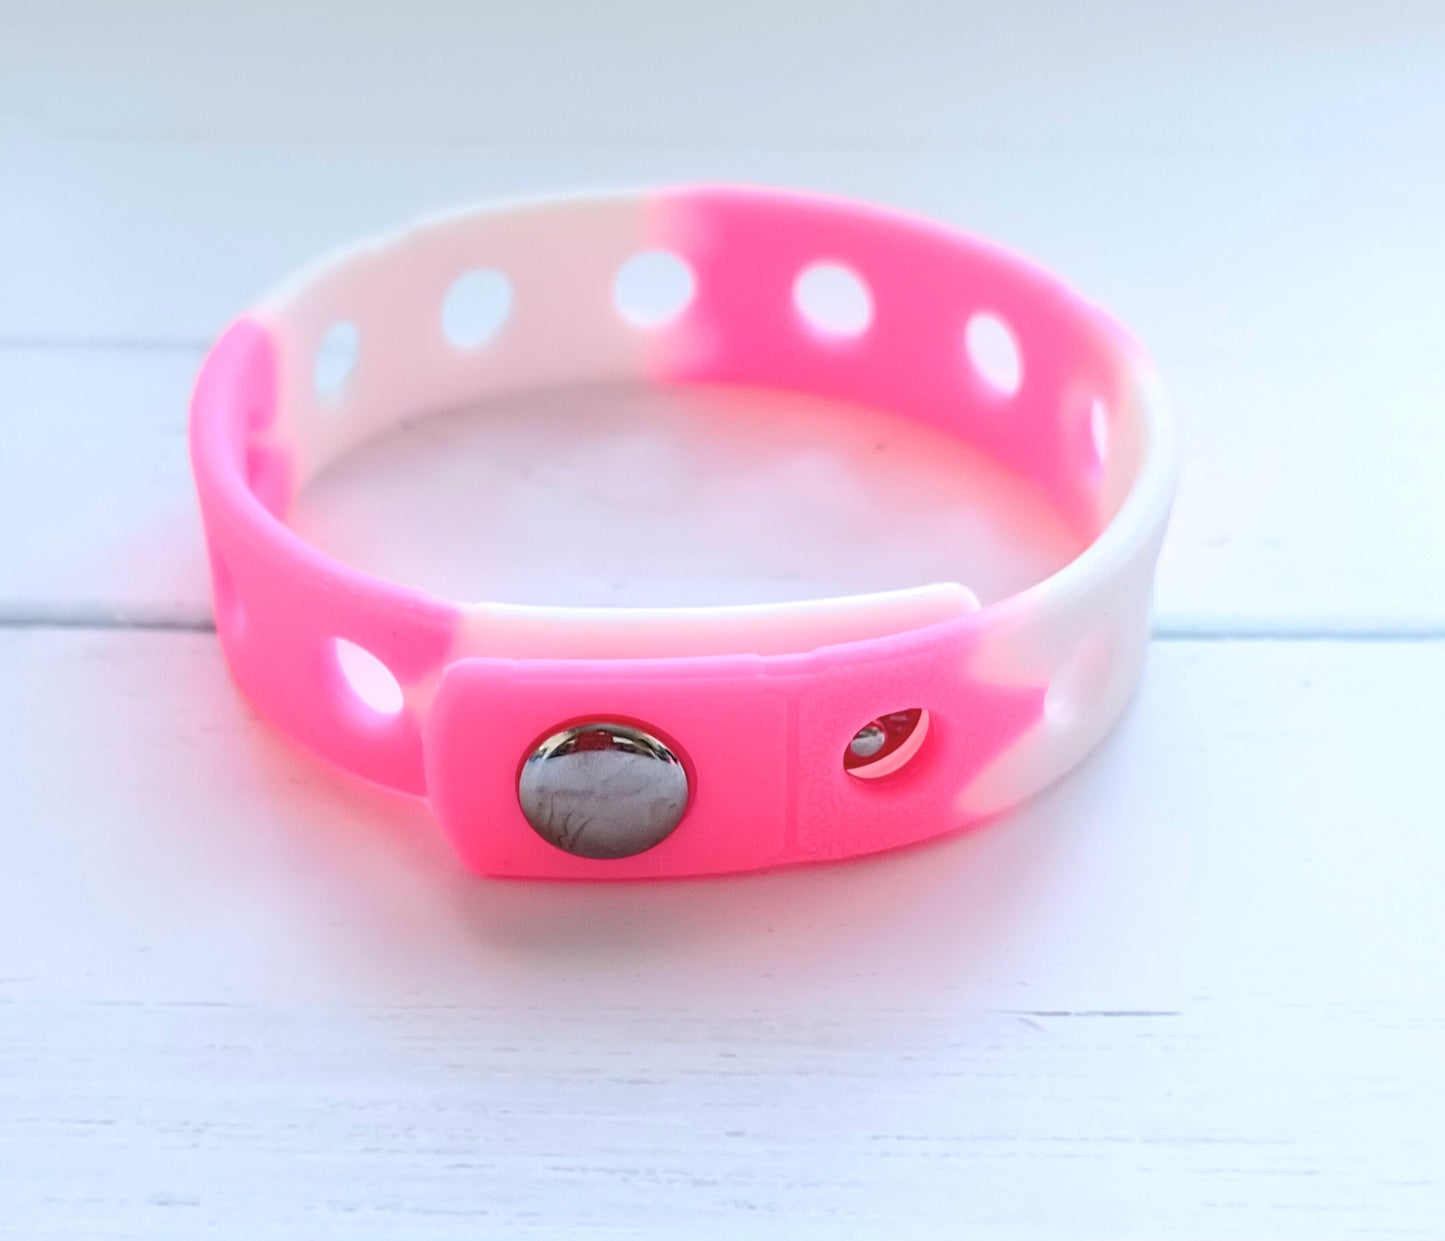 Colorful Kids/Teens Adjustable Silicone Croc Charms Wristbands/Bracelets 12 Colors 7 inches